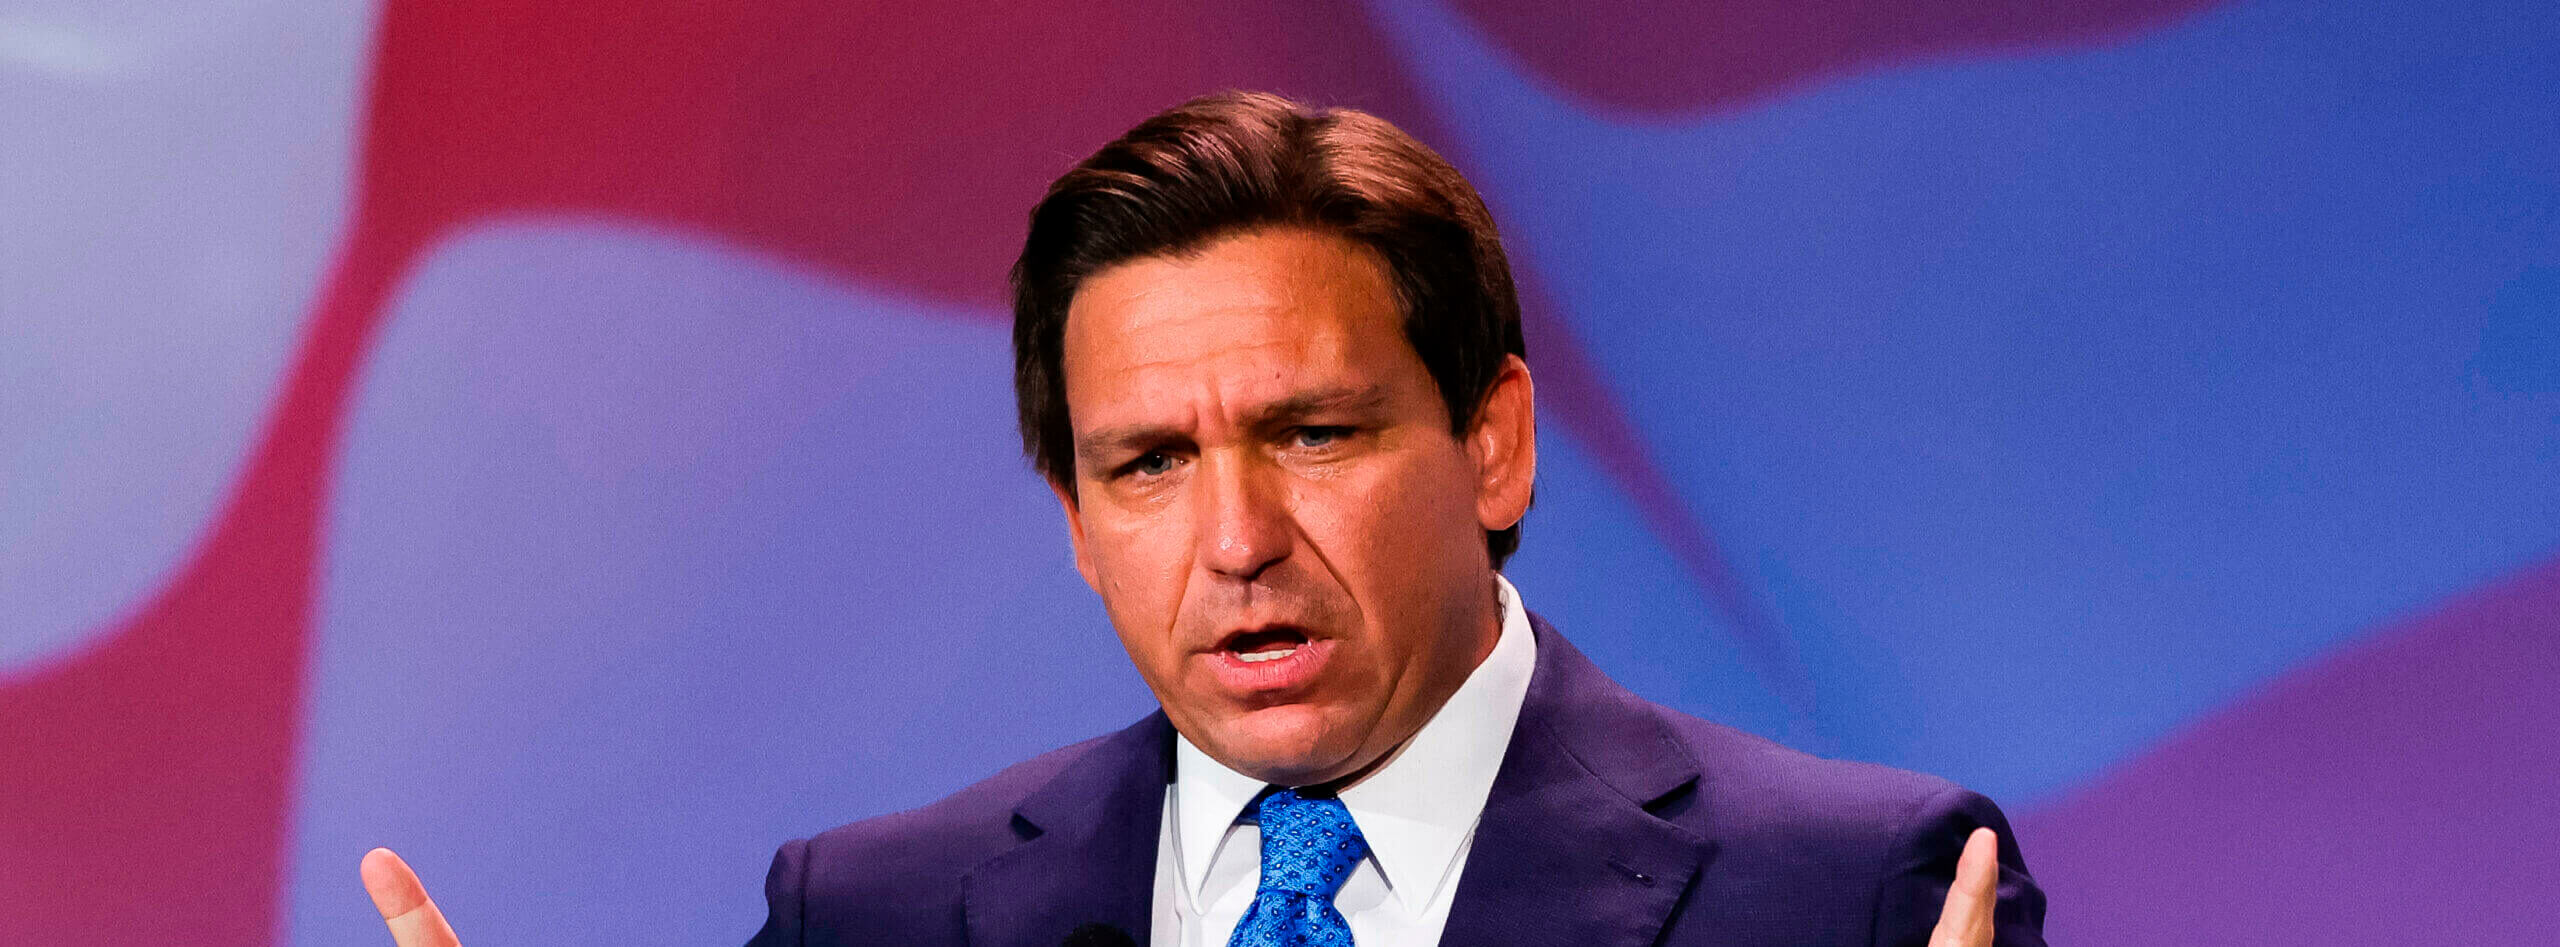 DeSantis: ‘Soros Attorney’ Alvin Bragg is ‘Weaponizing His Office’ to Prosecute Trump › American Greatness